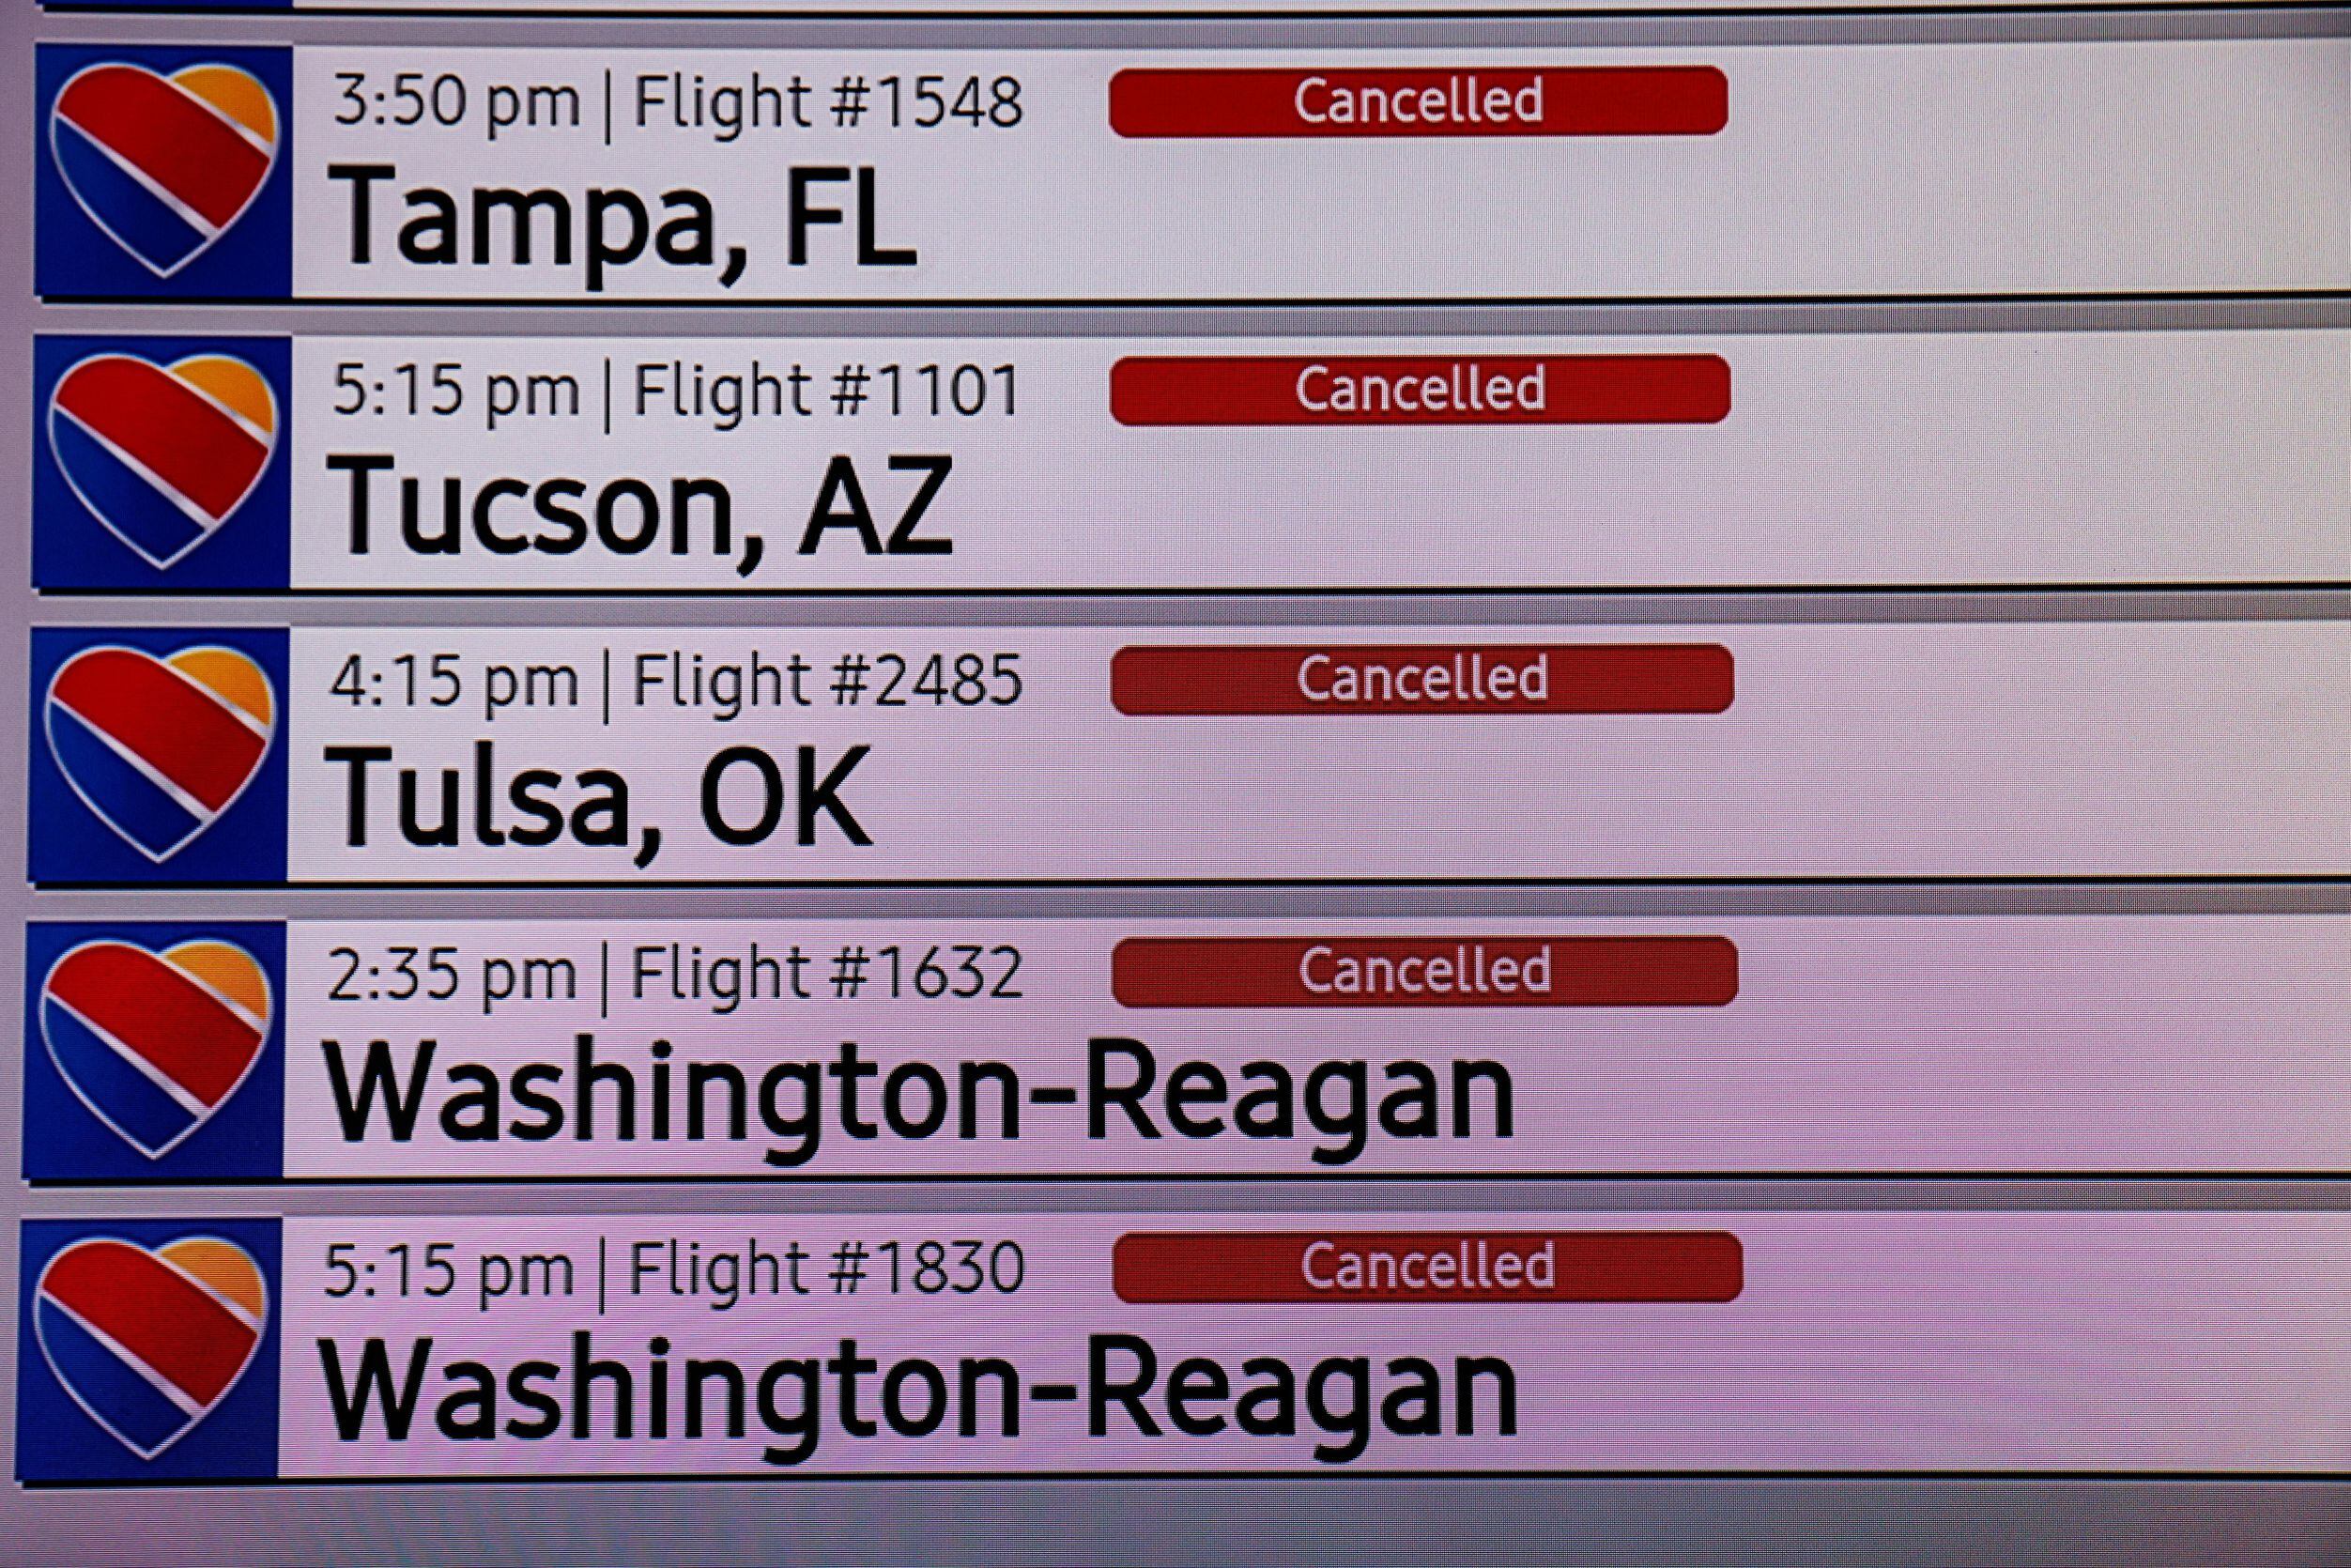 The Dallas Love Field airport cancelled all their flights in Dallas on Thursday, February 3,...